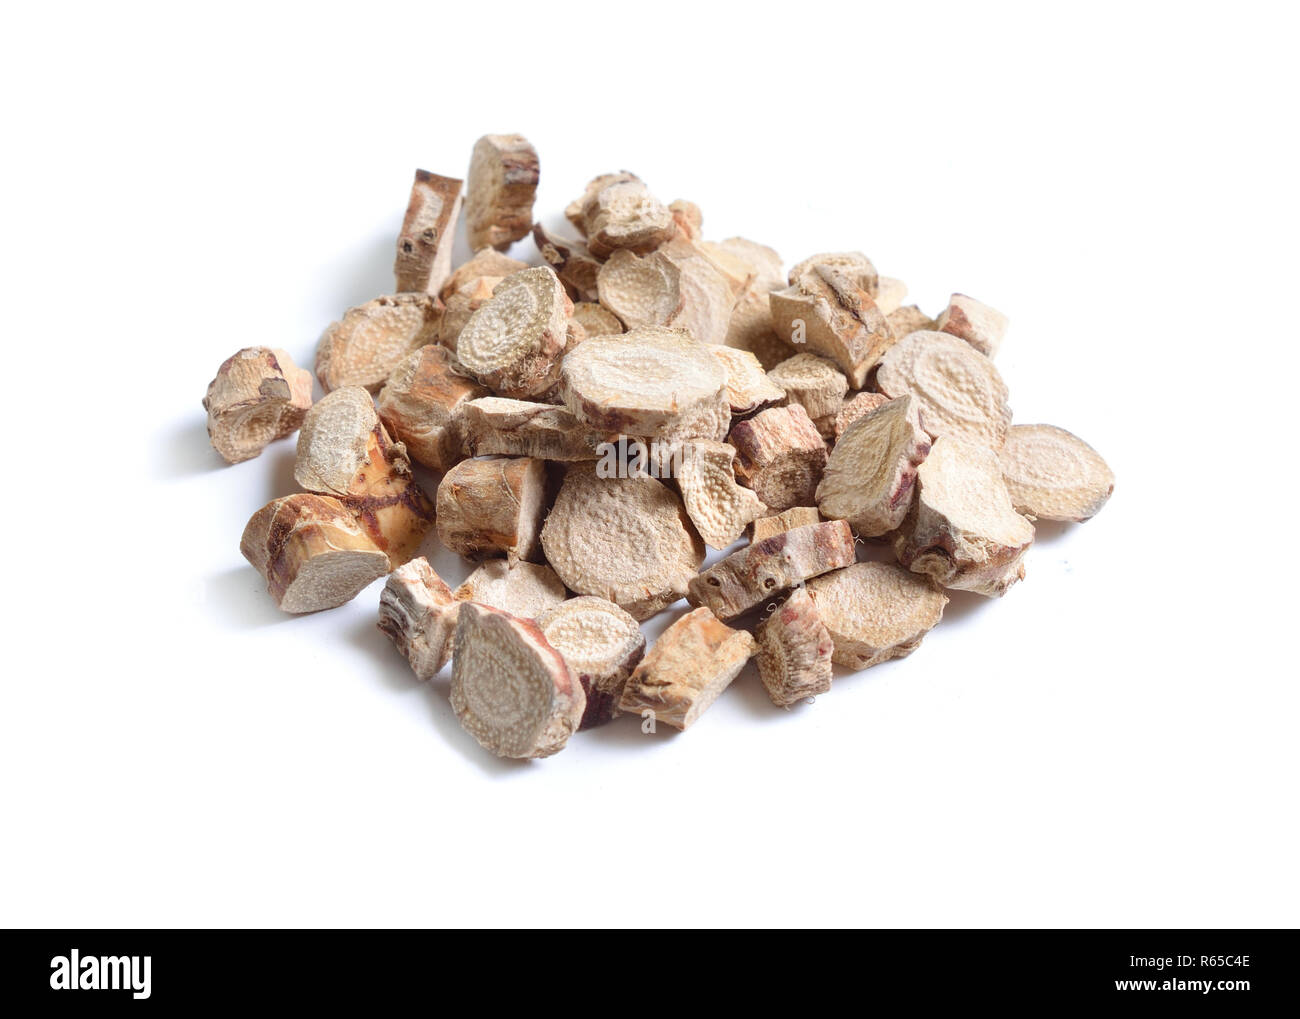 Dried medicinal herbs raw materials isolated on white. Root of Acorus calamus, also called sweet flag or calamus. Stock Photo